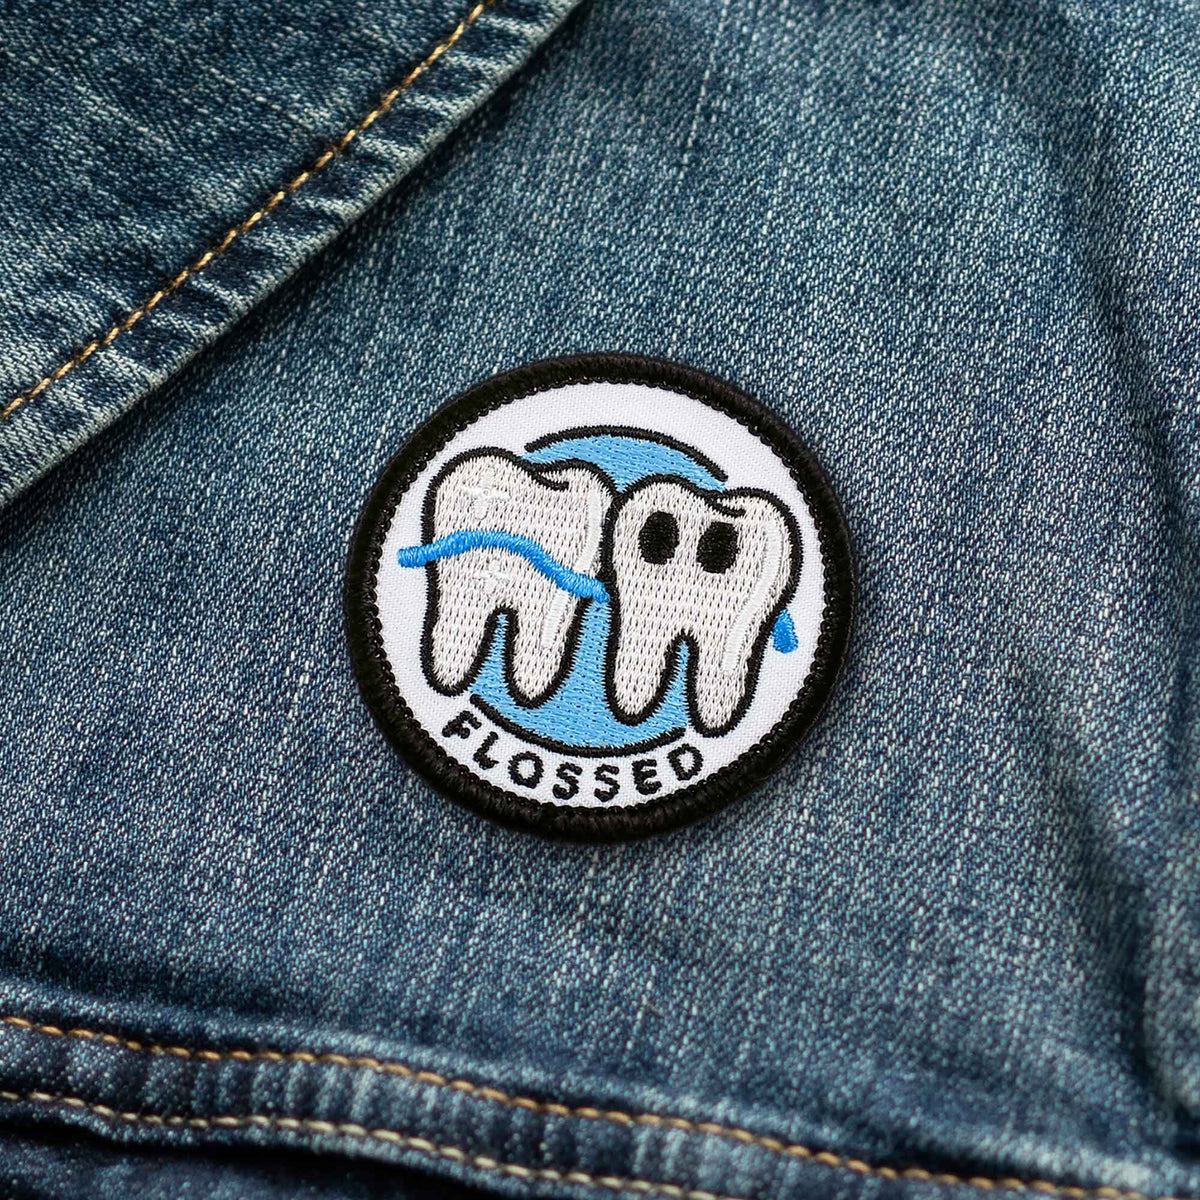 Flossed adulting merit badge patch for adults on denim jacket